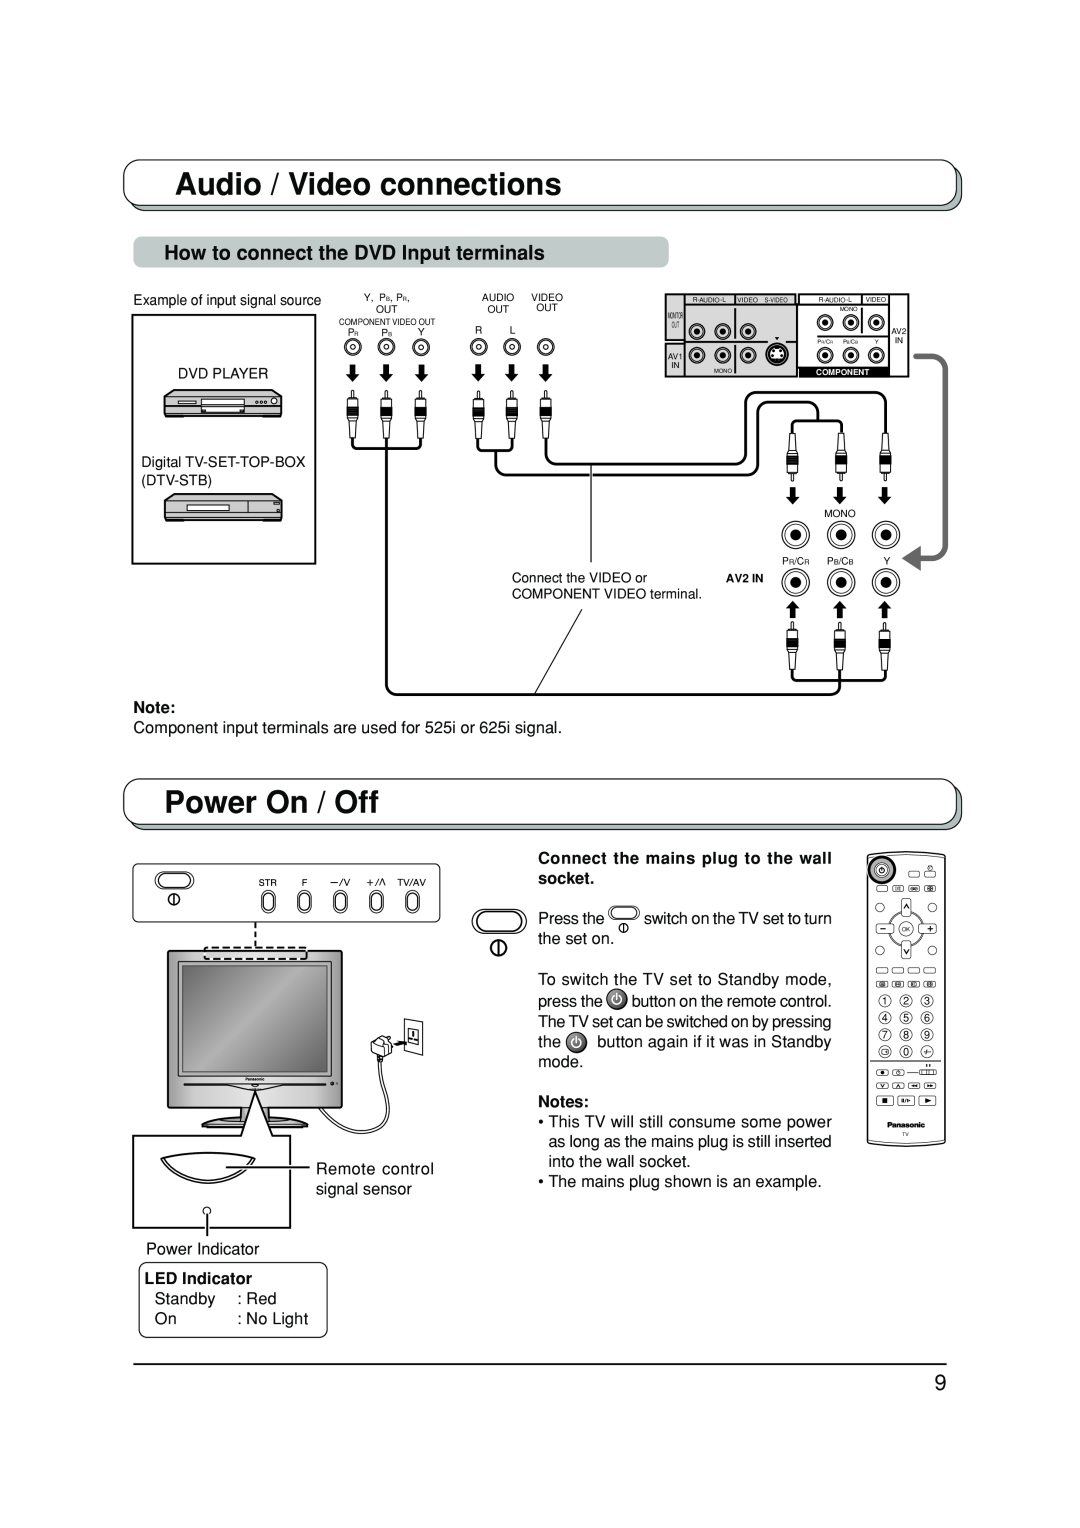 Panasonic TX-20LA2A manual Power On / Off, Audio / Video connections, How to connect the DVD Input terminals, LED Indicator 